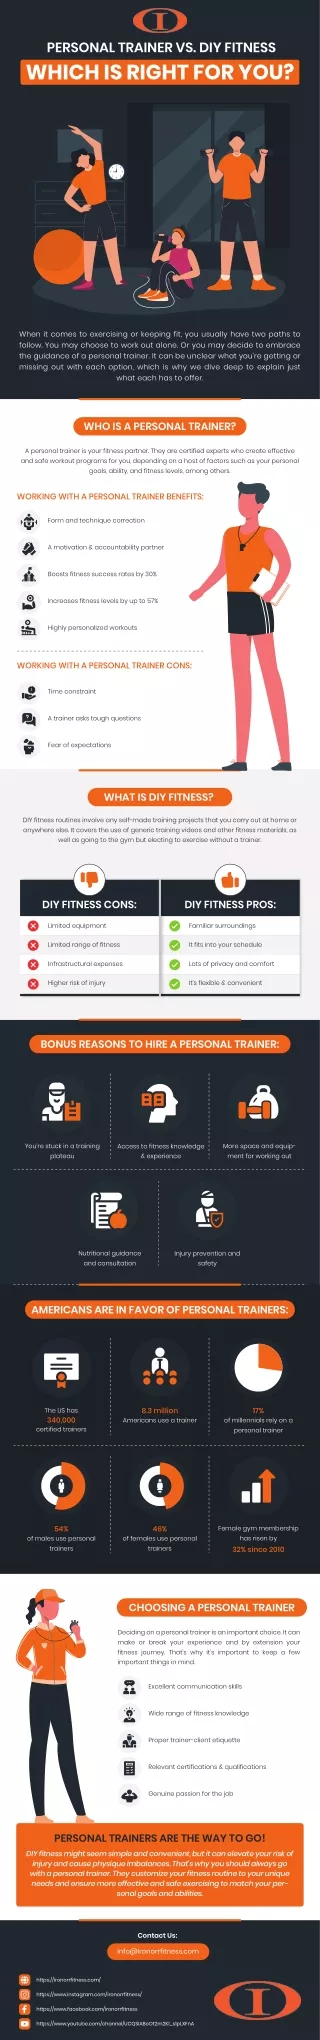 Personal Trainer Vs DIY fitness - Infographic